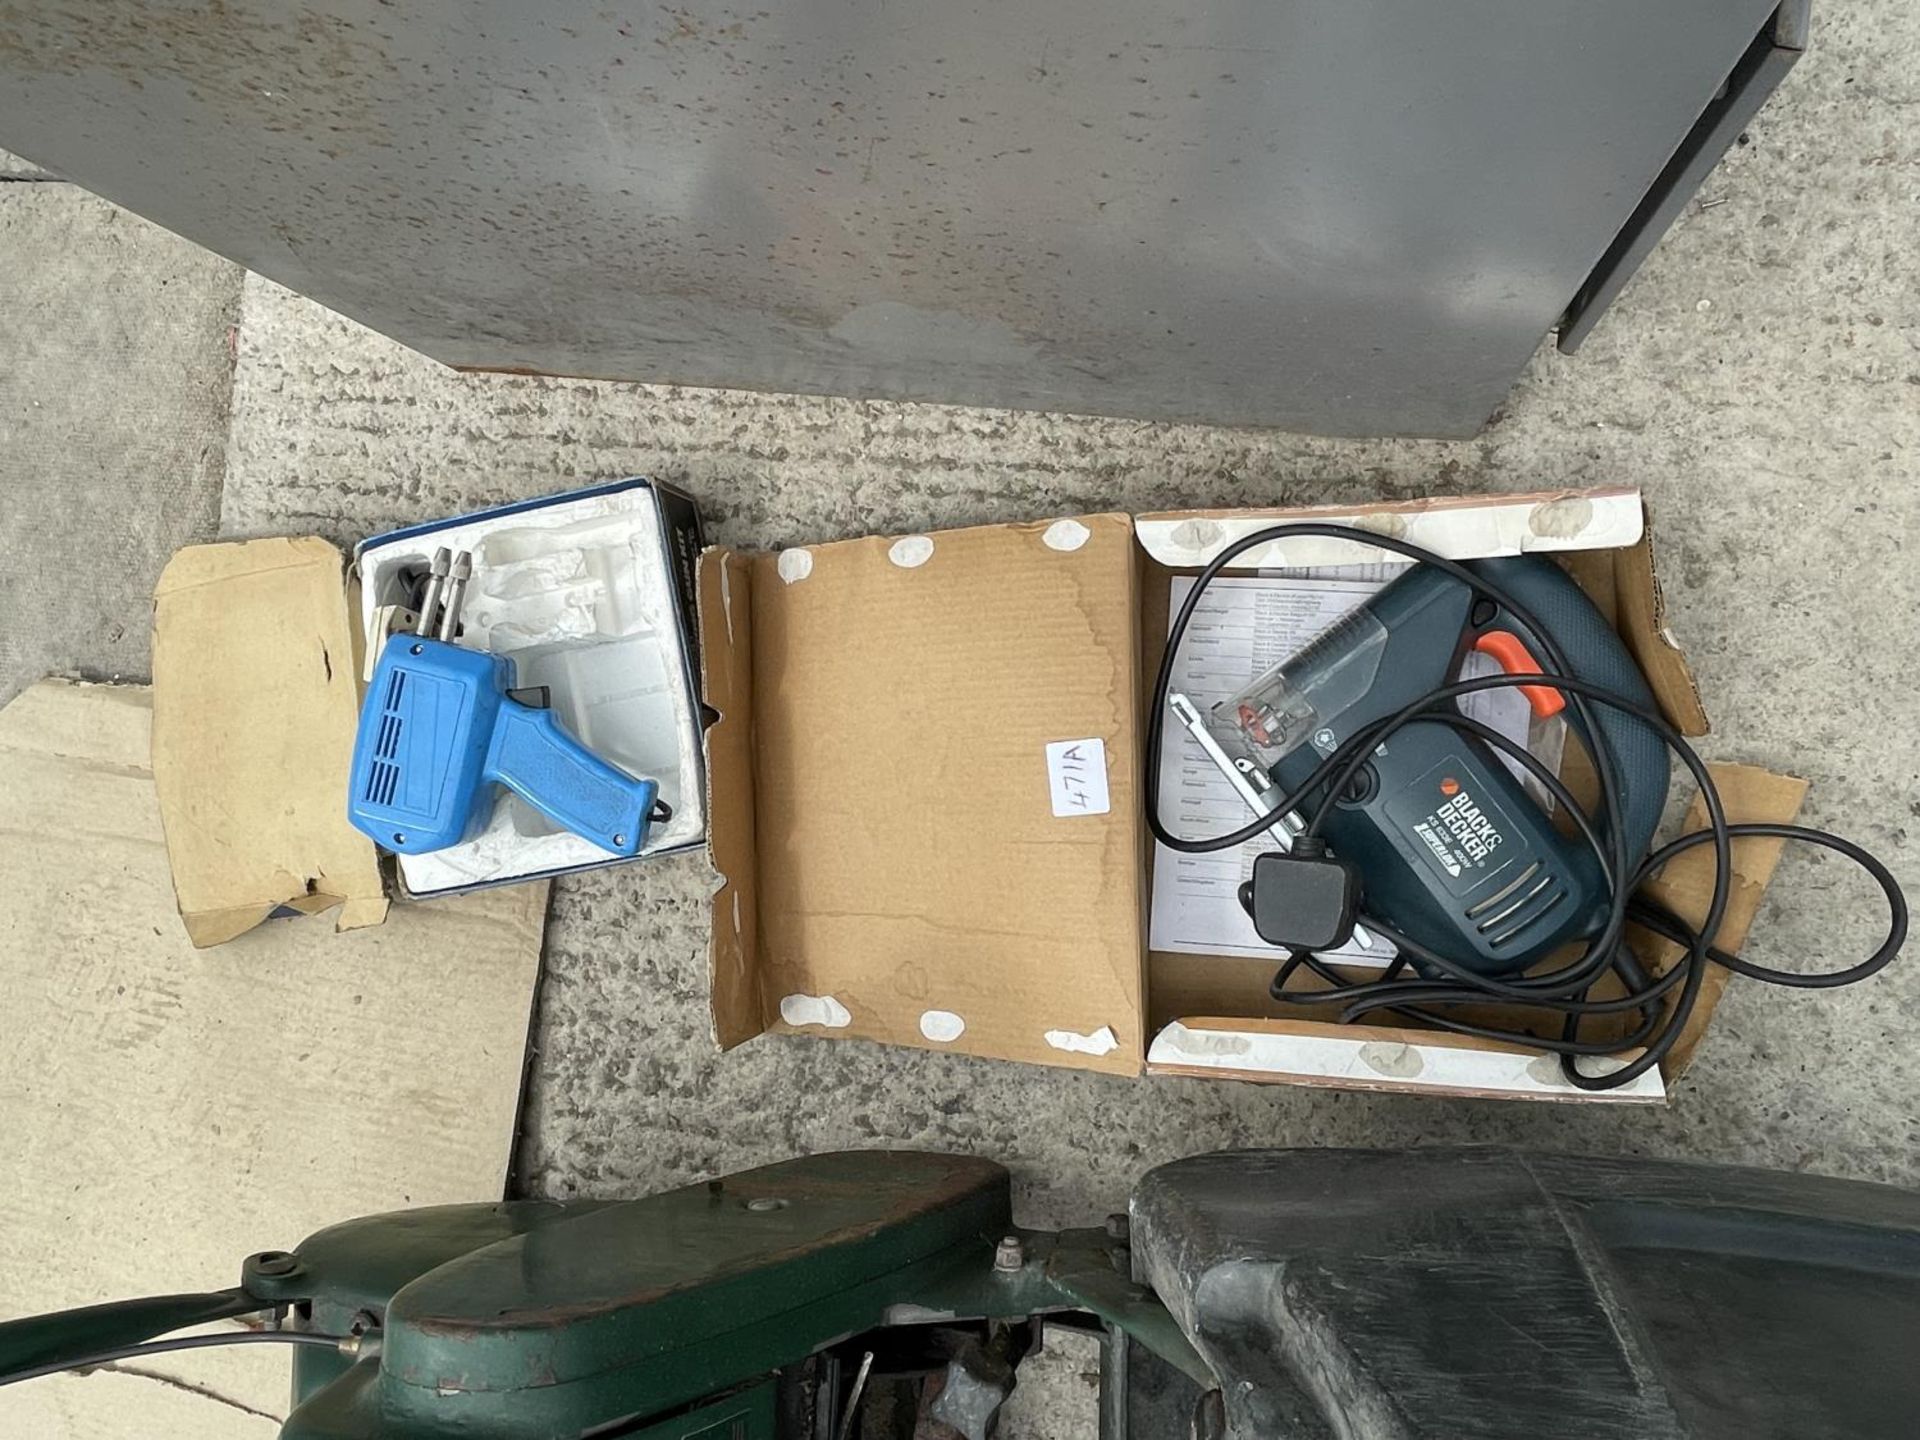 A JIGSAW AND A DRAPER SOLDERING GUN IN BOXES